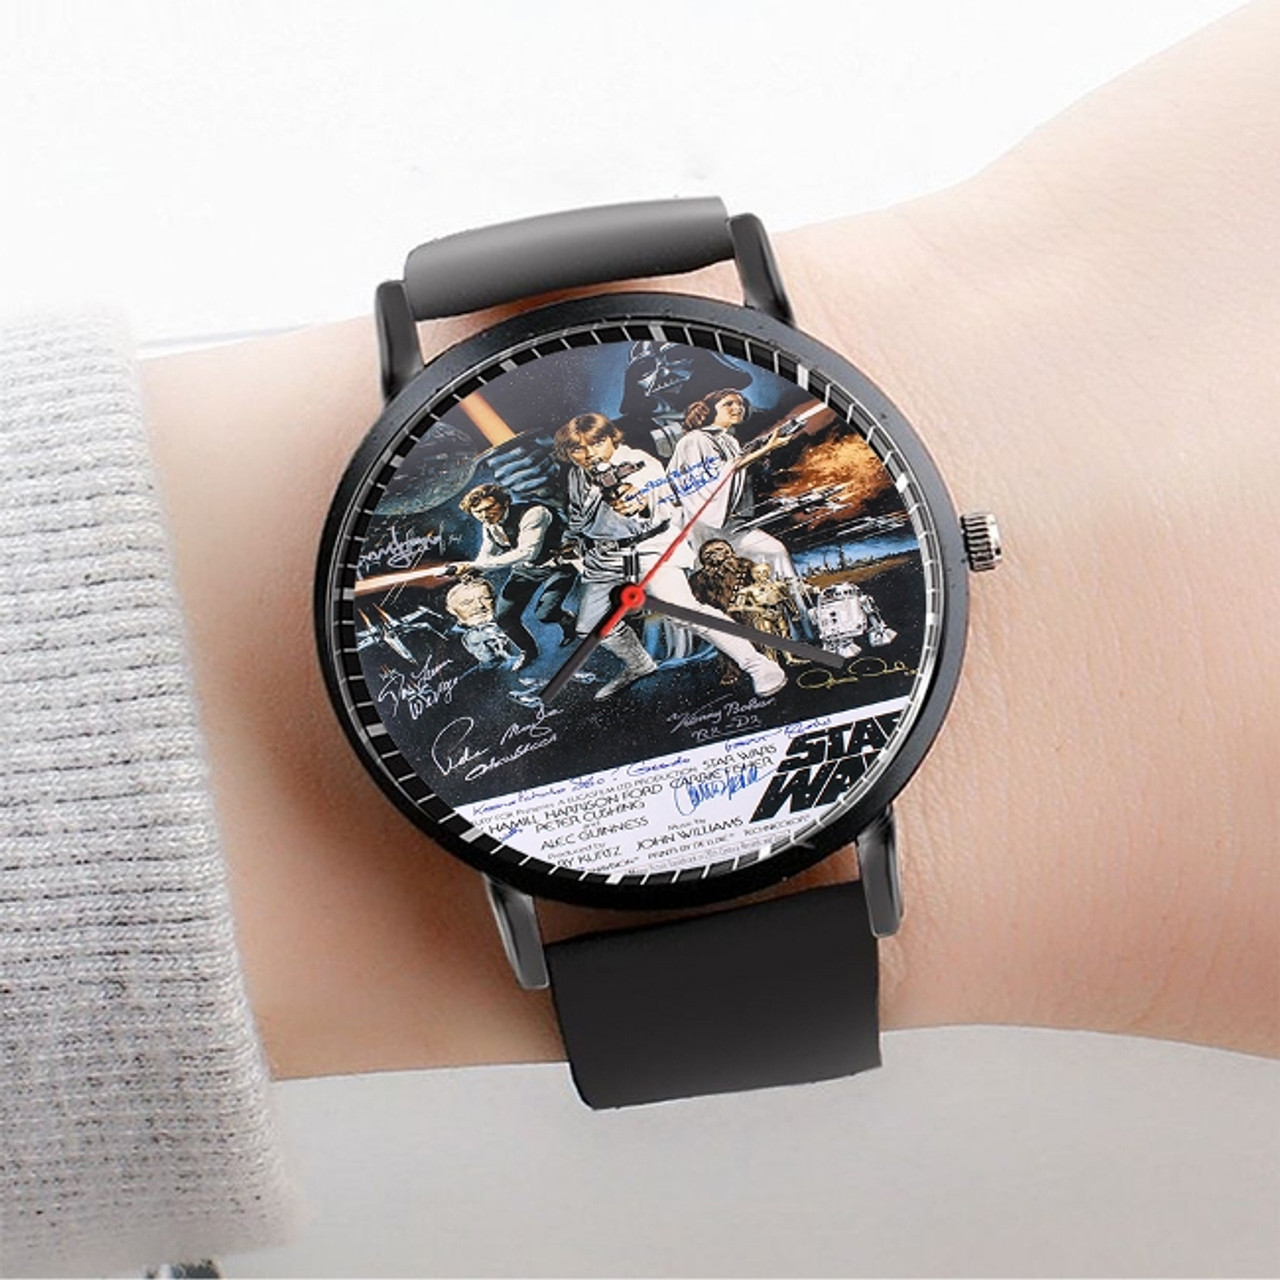 https://cdn11.bigcommerce.com/s-xhmrmcecz5/images/stencil/1280x1280/products/174902/180262/Star-Wars-Poster-Signed-By-Cast-Custom-Watch__91566.1672203562.jpg?c=1